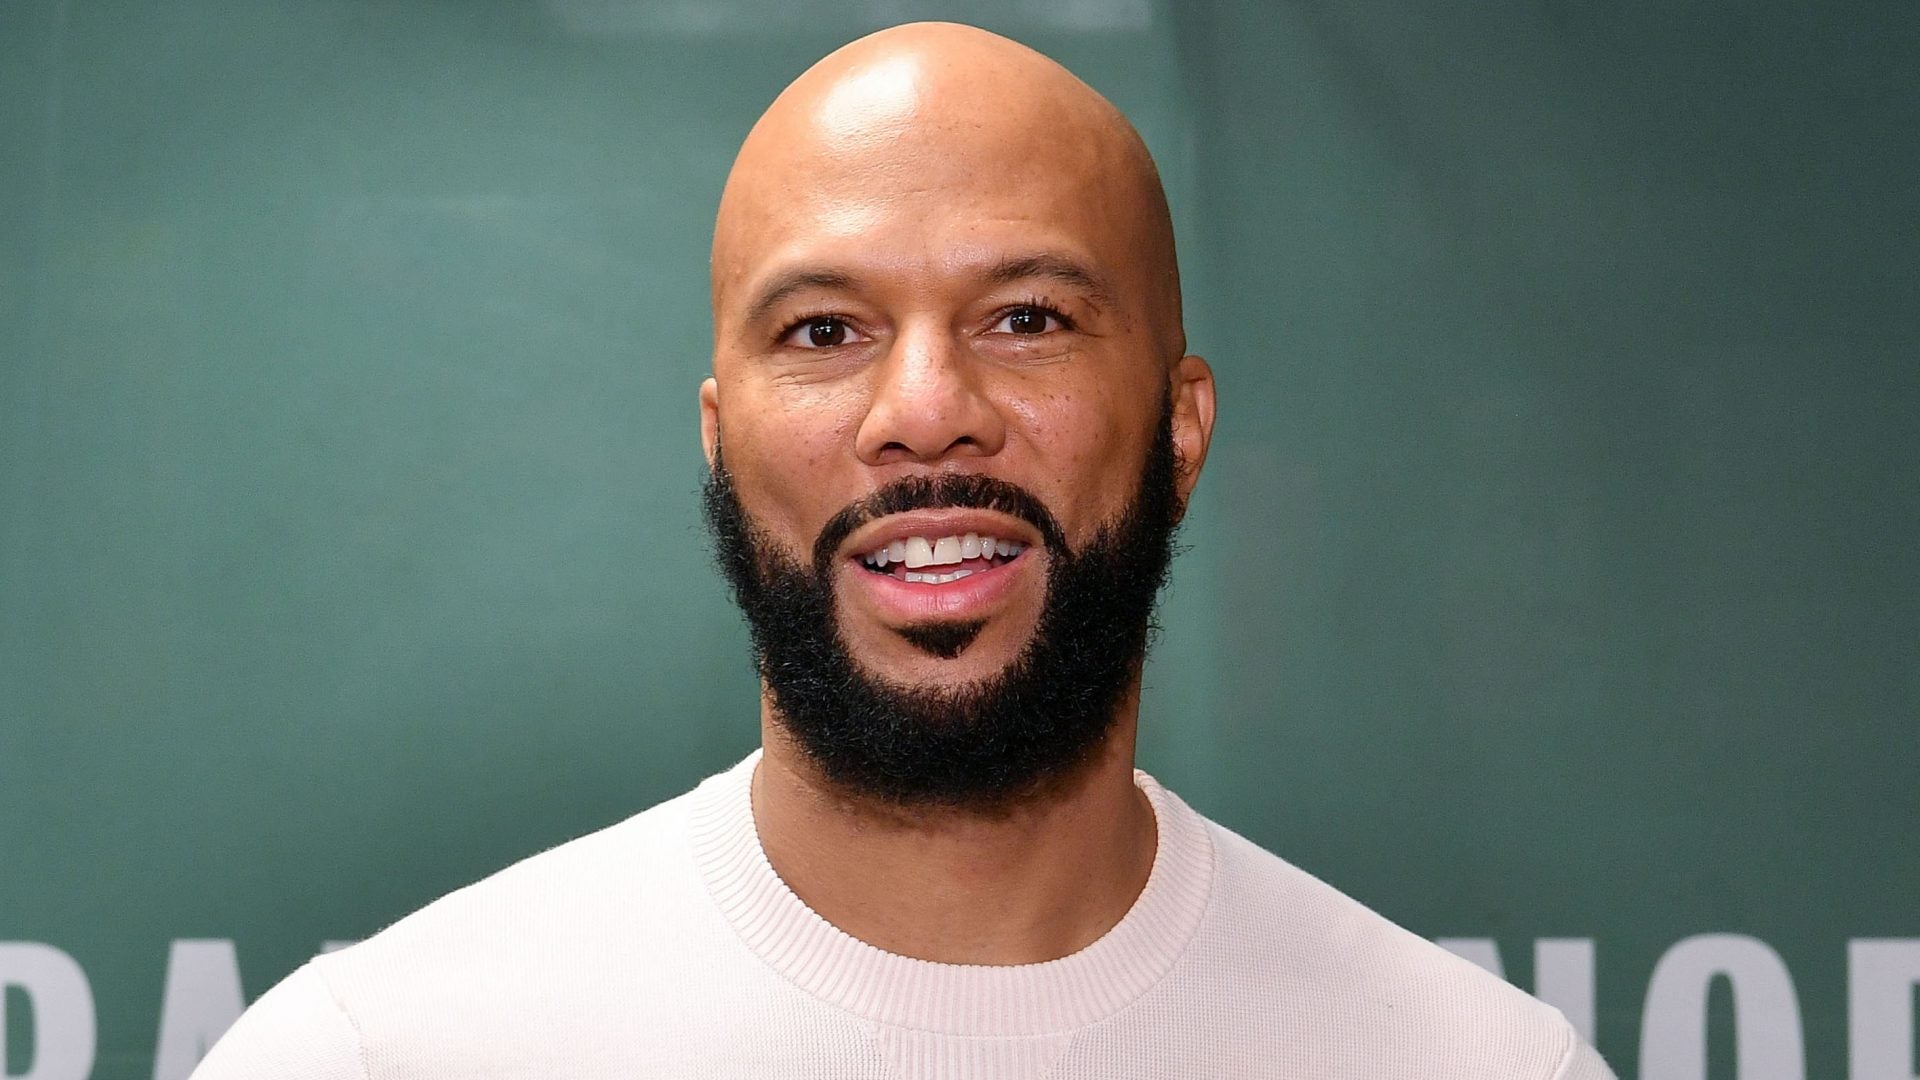 Exclusive: Common's New Health Series 'Com + Well' Is His Latest Form Of Activism